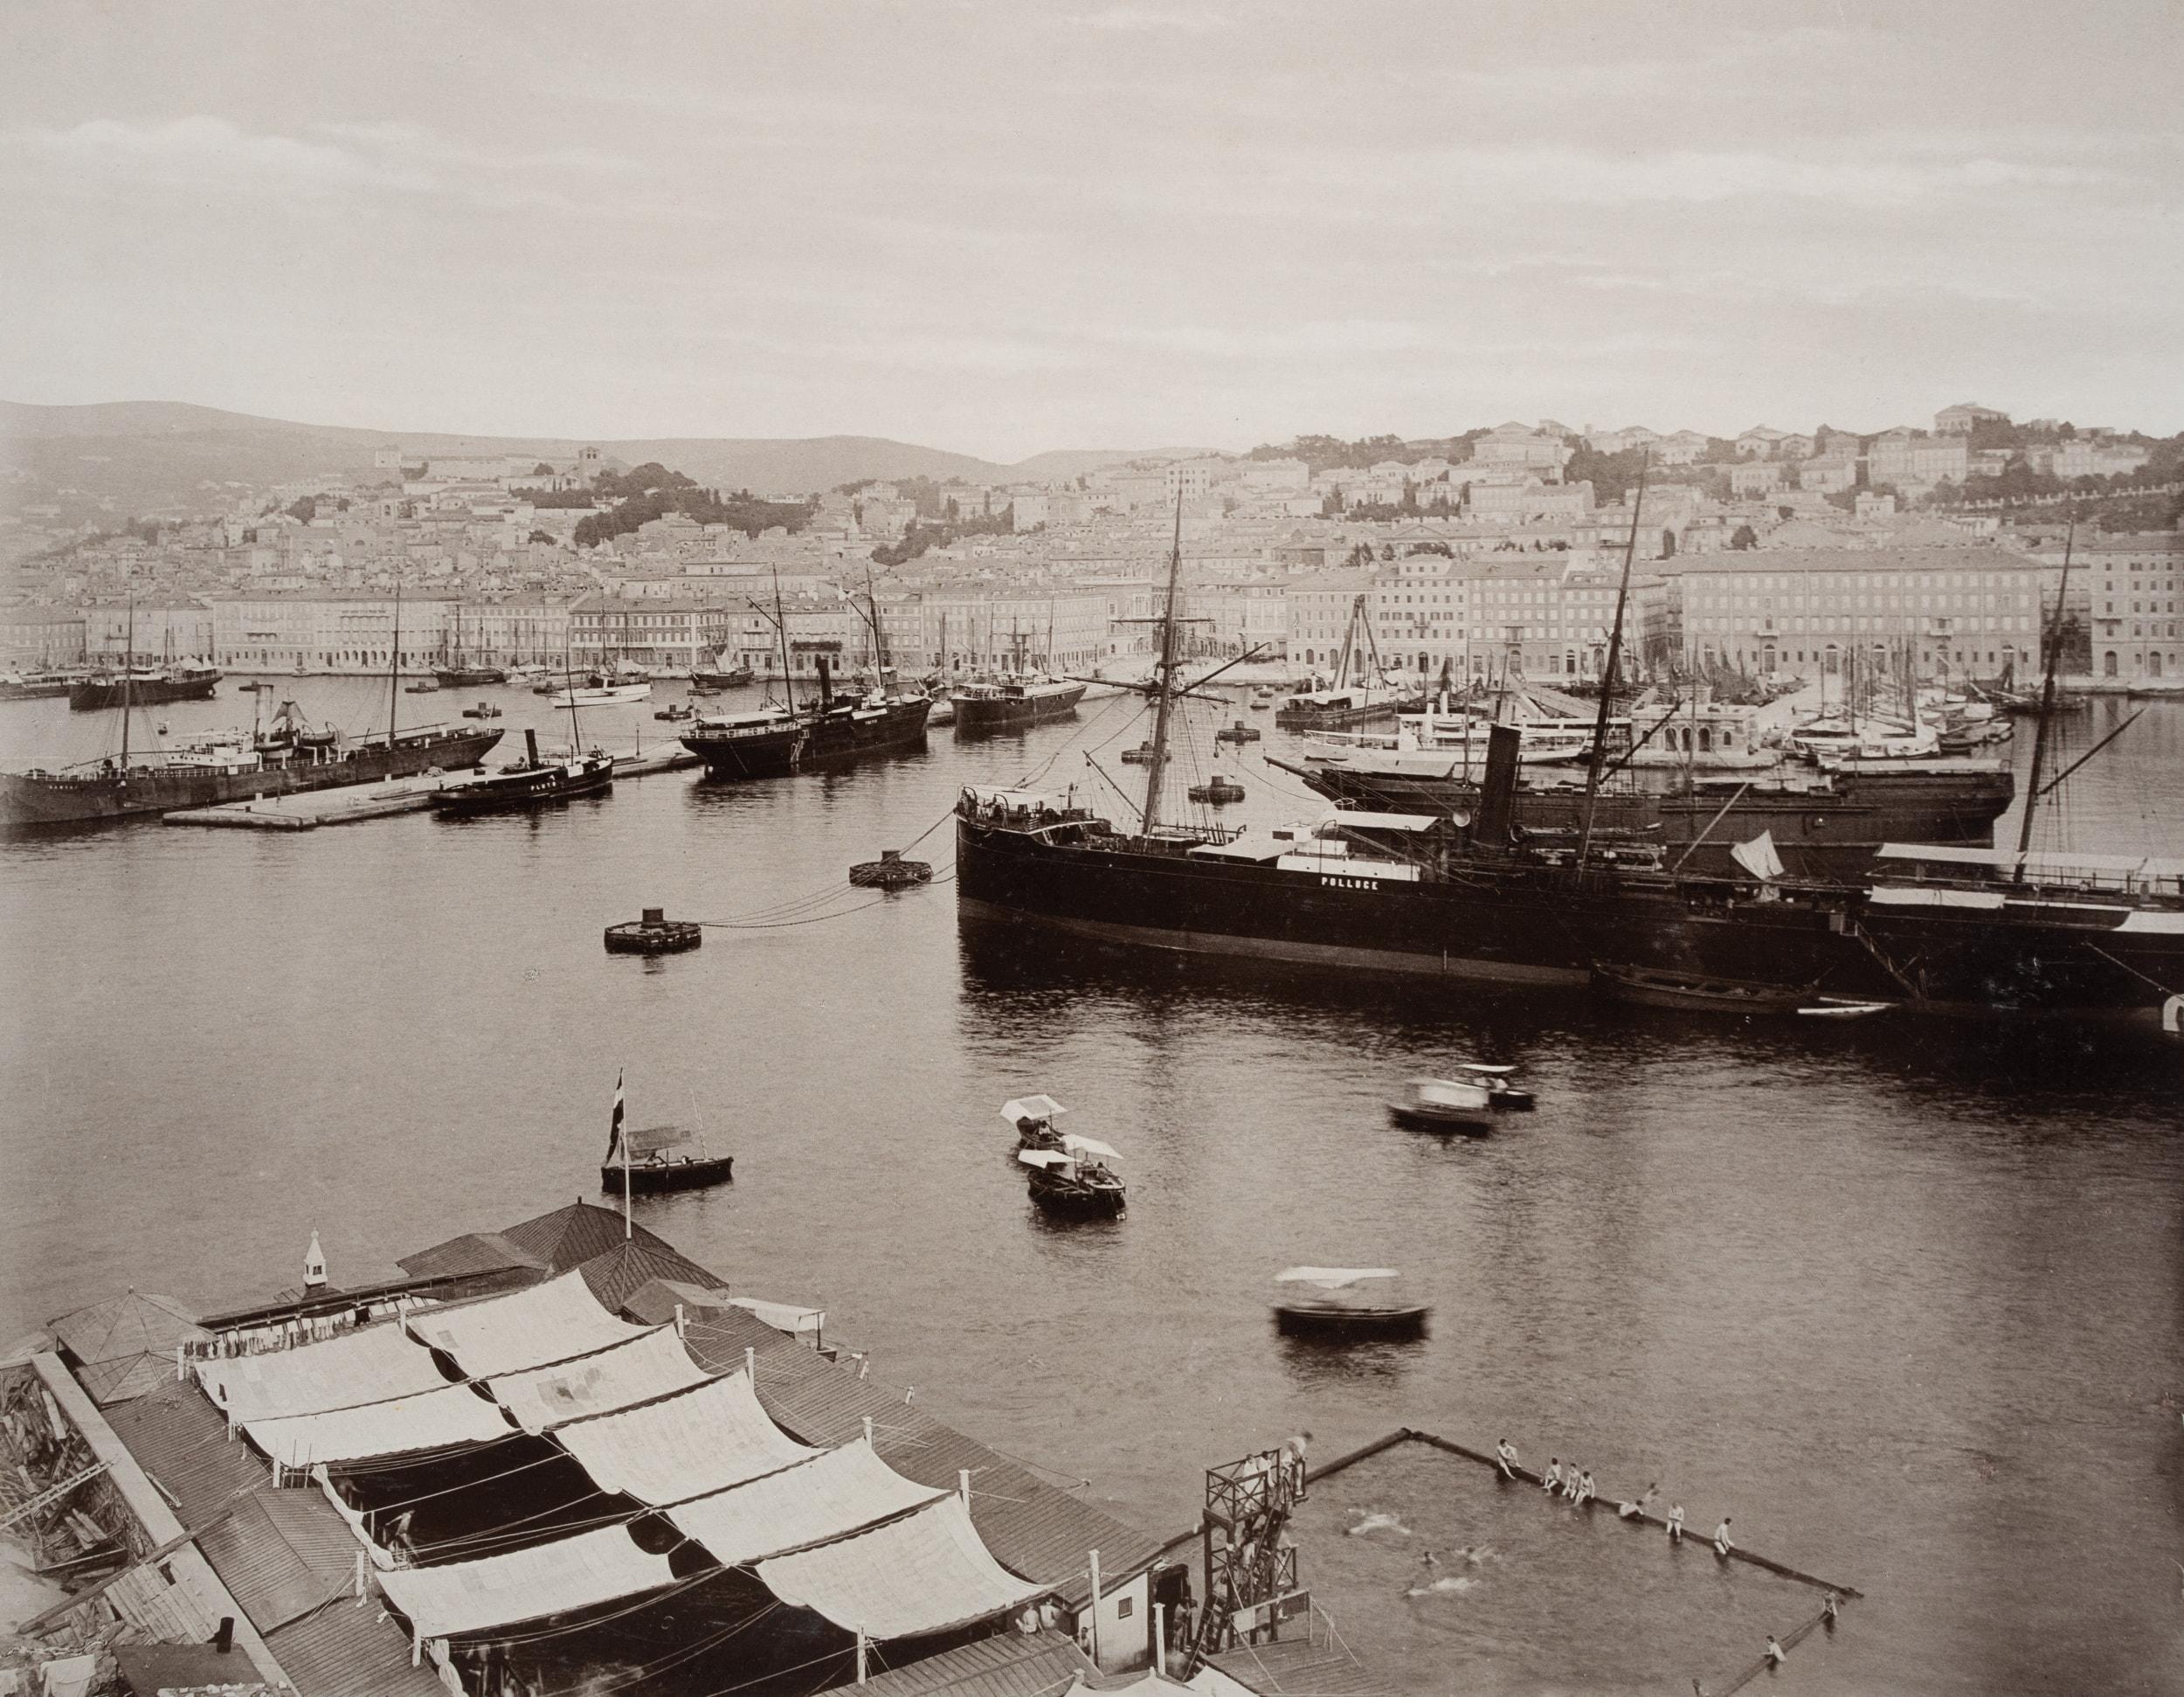 Unknown Landscape Photograph - Port of Trieste with large ships